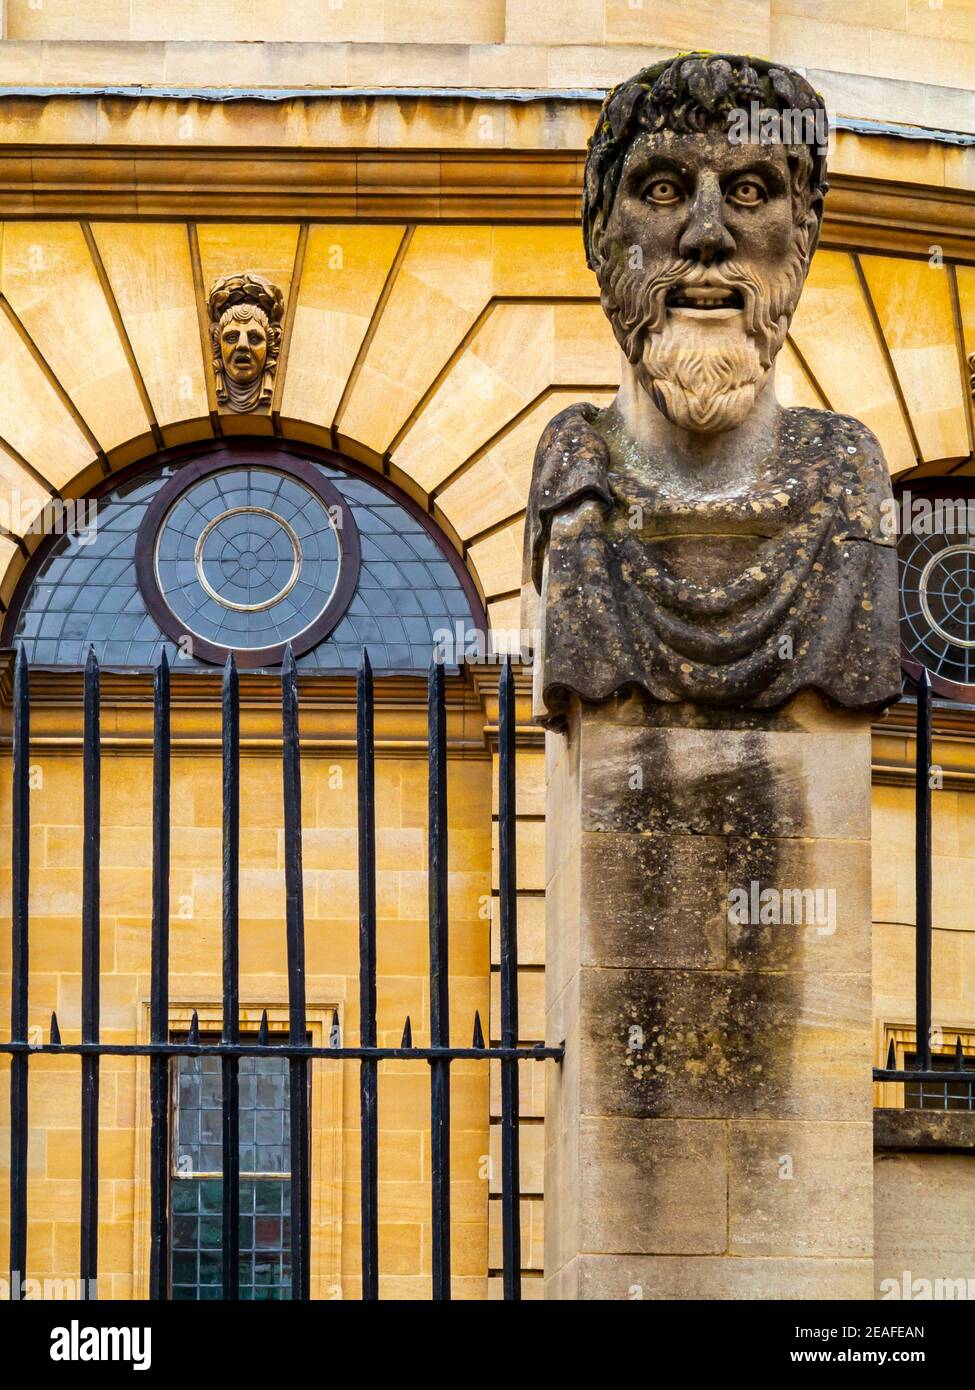 Exterior detail of the Sheldonian Theatre in Oxford England UK built from 1664 to 1669 after a design by Sir Christopher Wren for Oxford University. Stock Photo